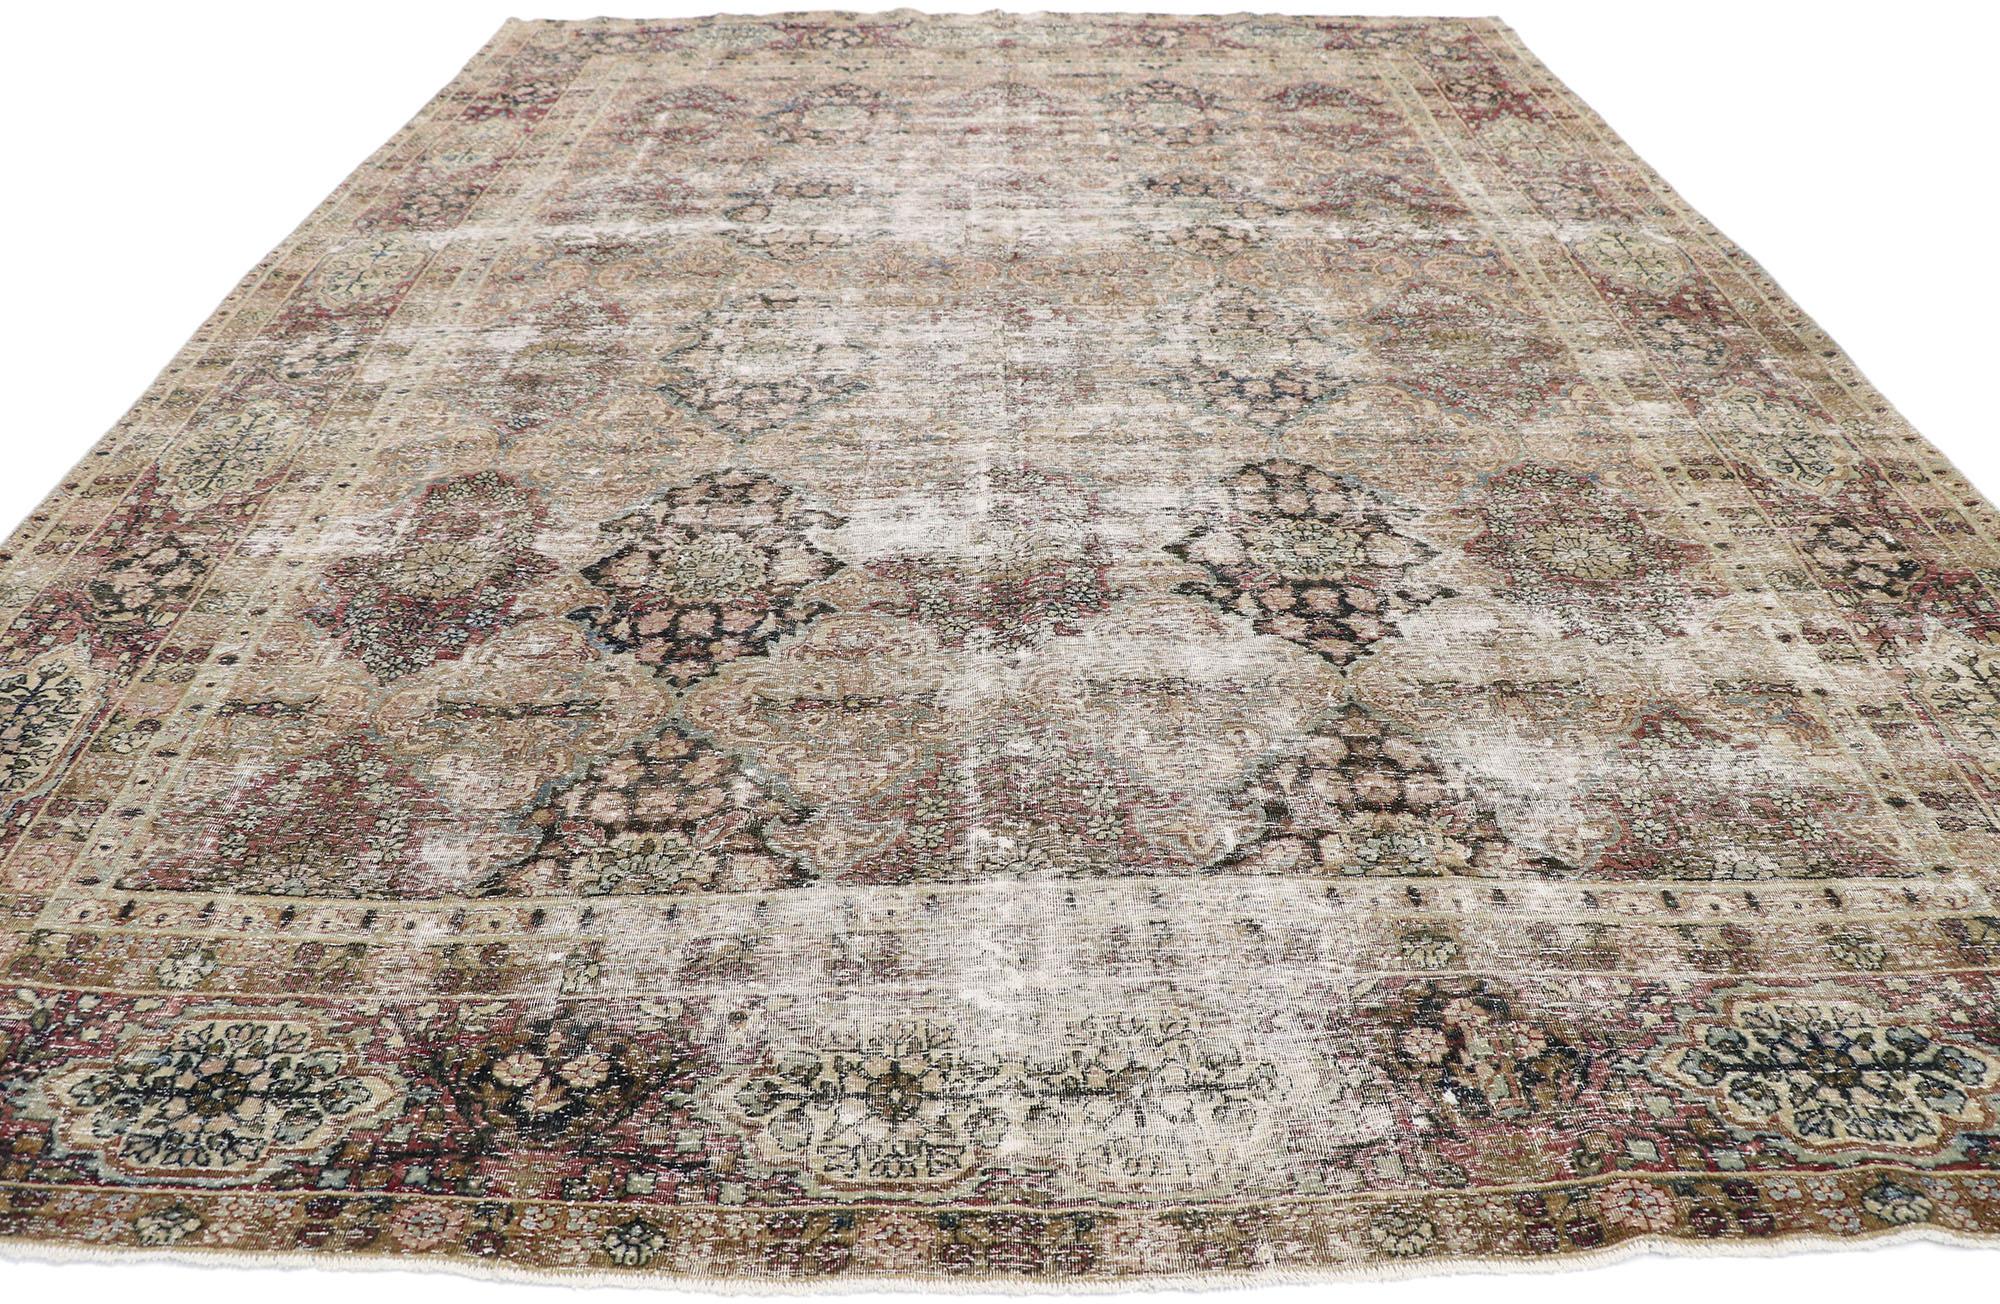 Kirman Distressed Antique Persian Kerman Rug with Rustic Renaissance Style For Sale